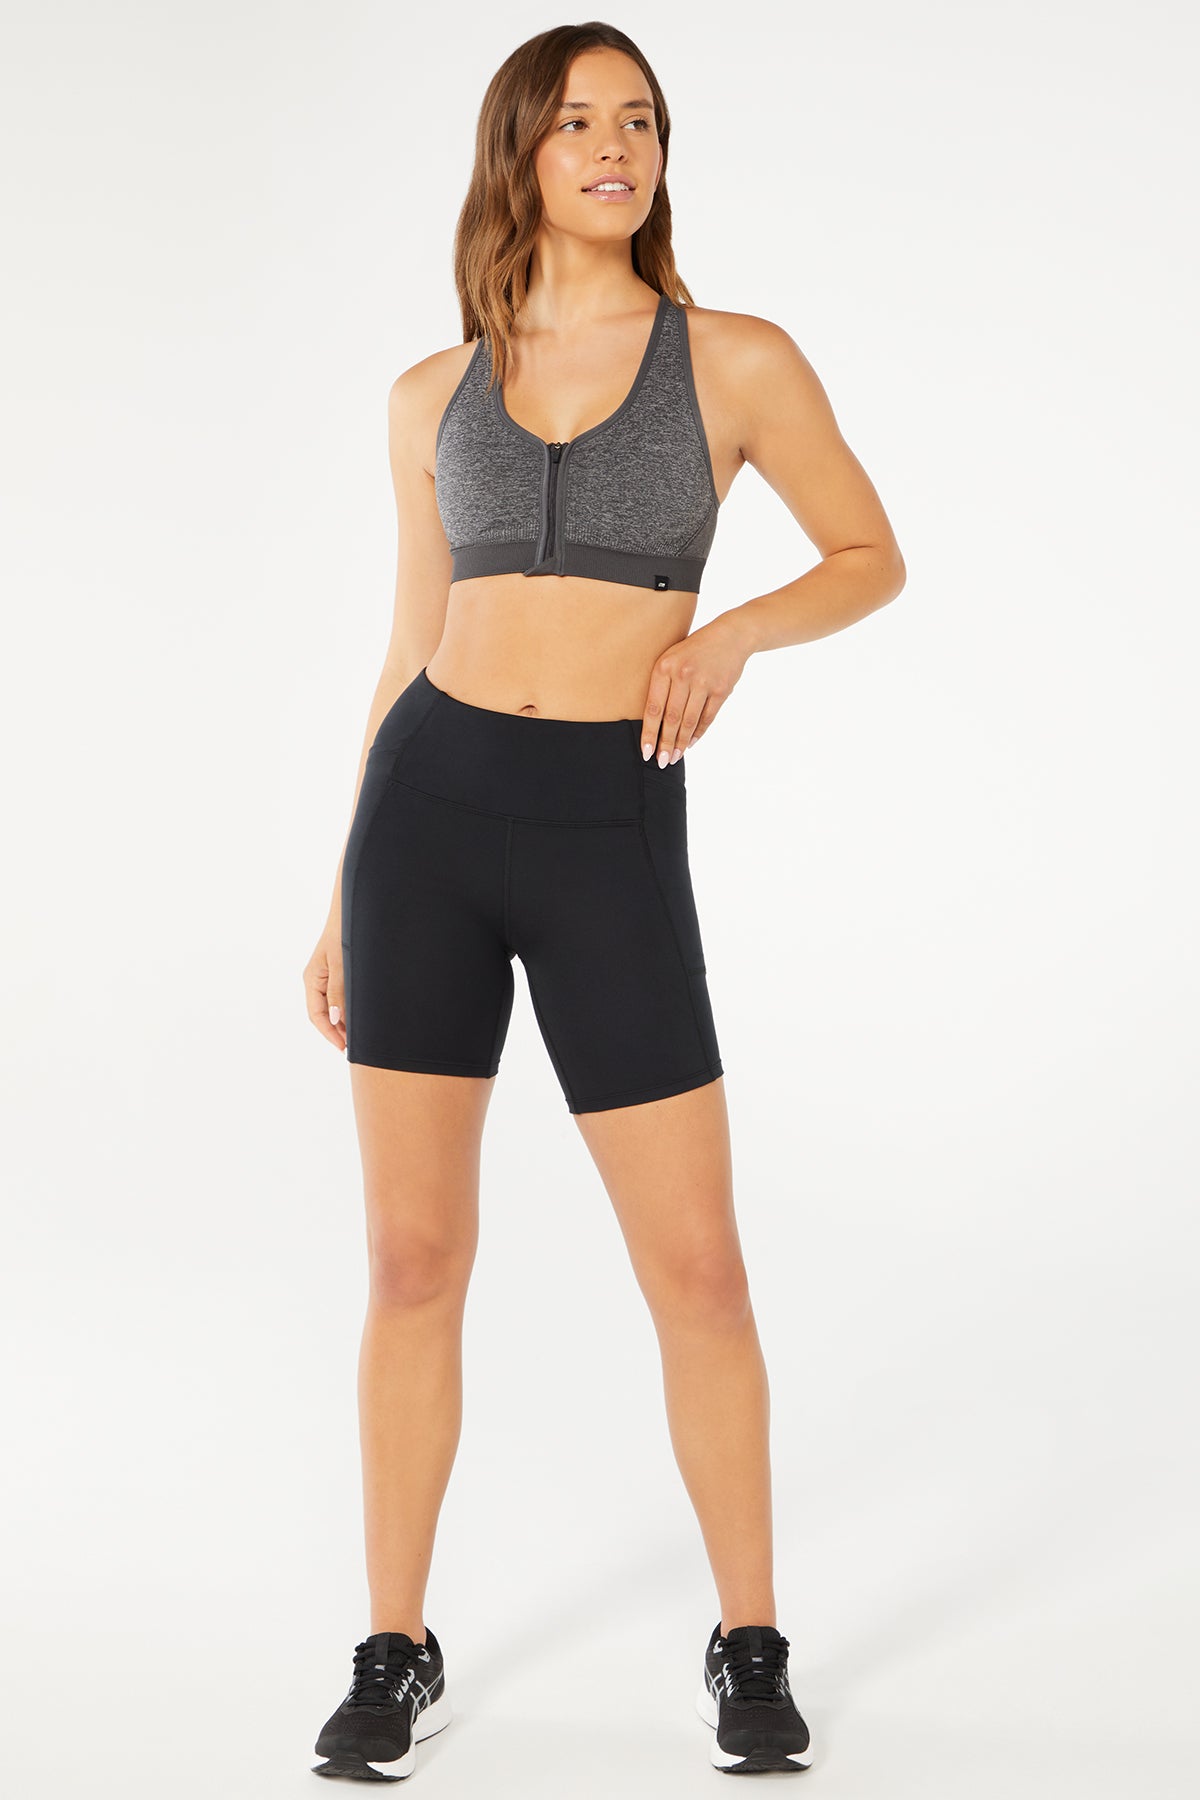 Rock Your Body - An Ellie Activewear Subscription Outfit